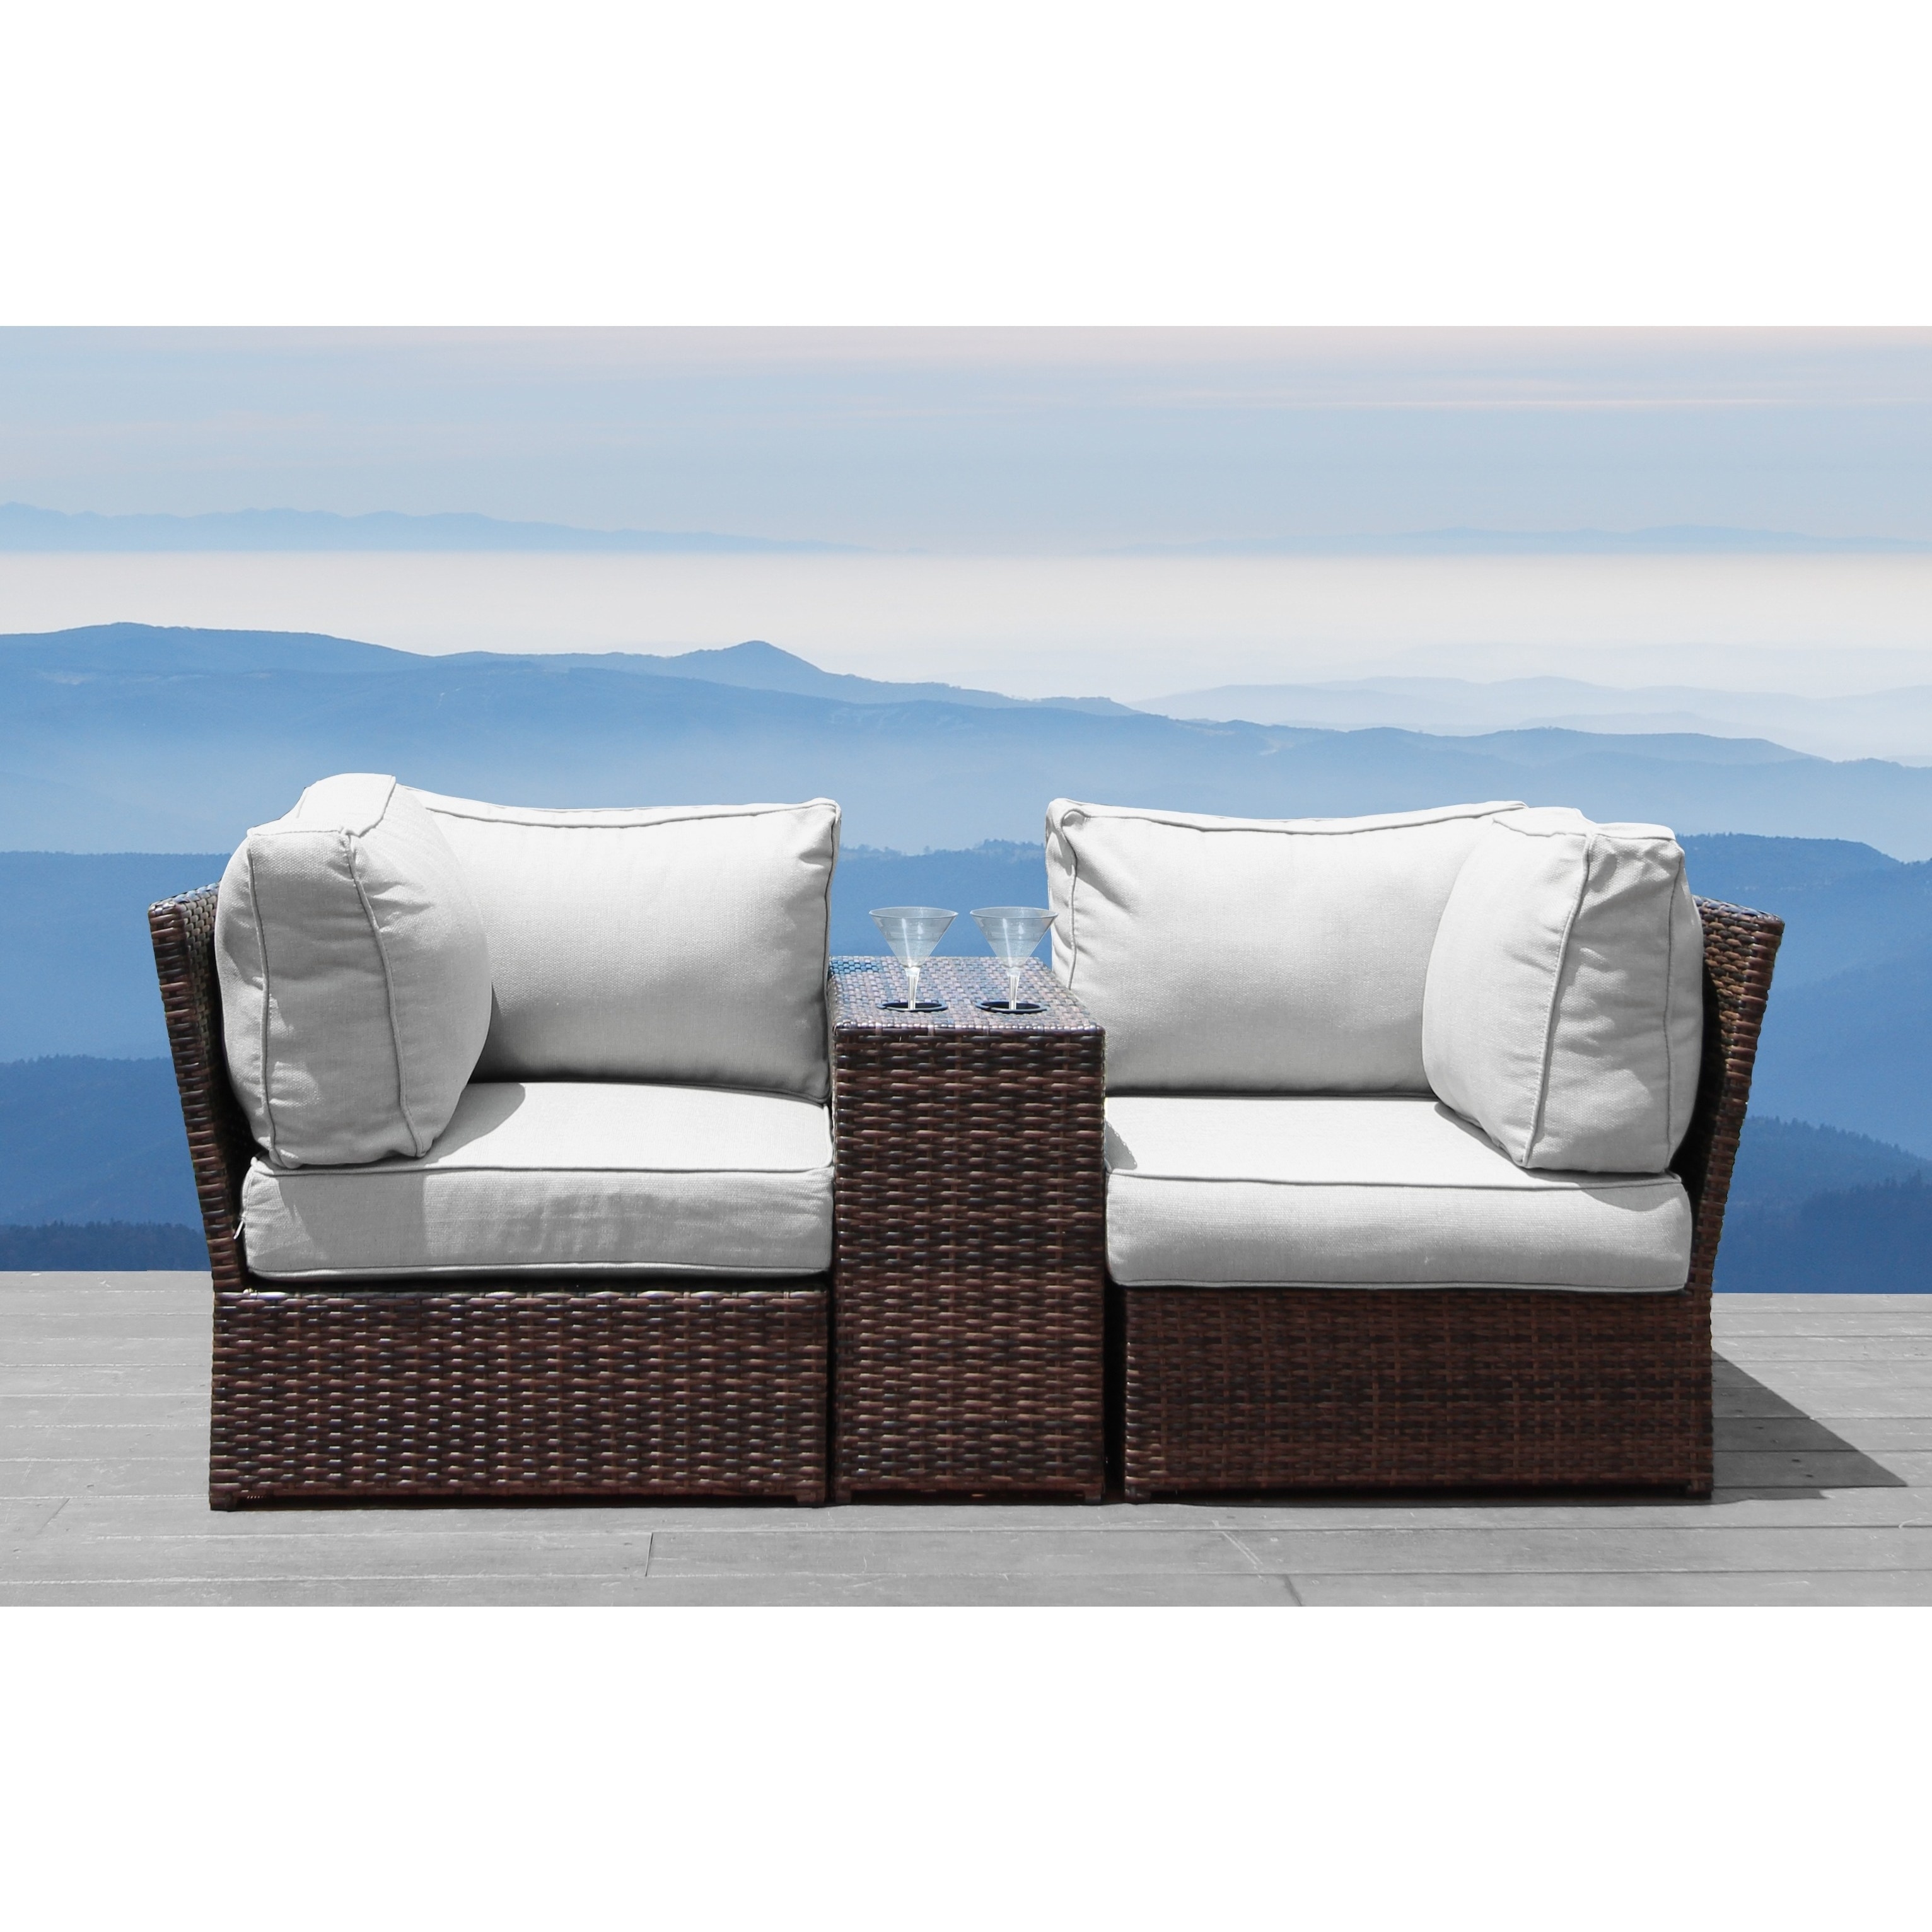 Lsi Brown Wicker Cup Holder Table And Loveseat